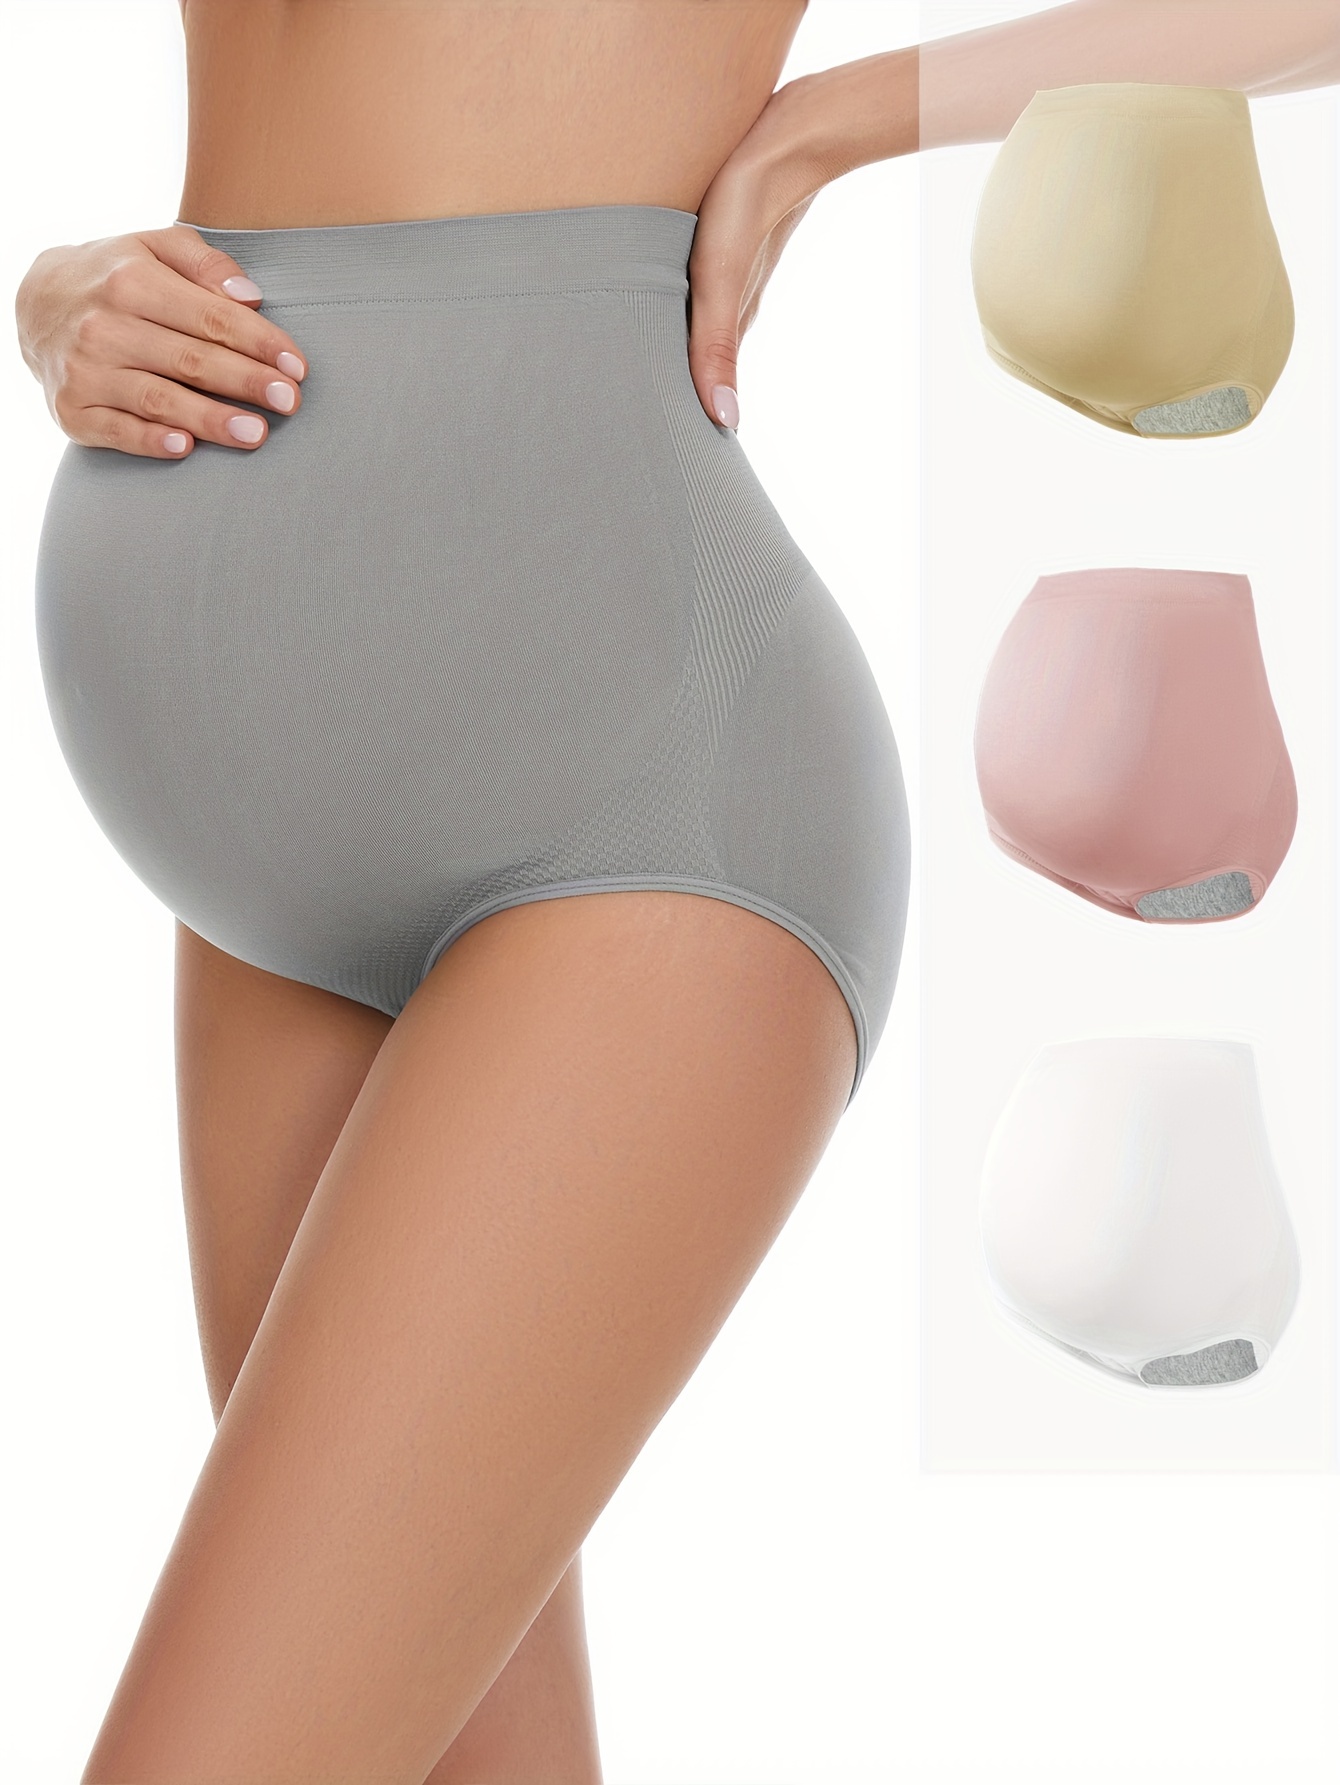 Pregnant Women Support Panties / Maternity